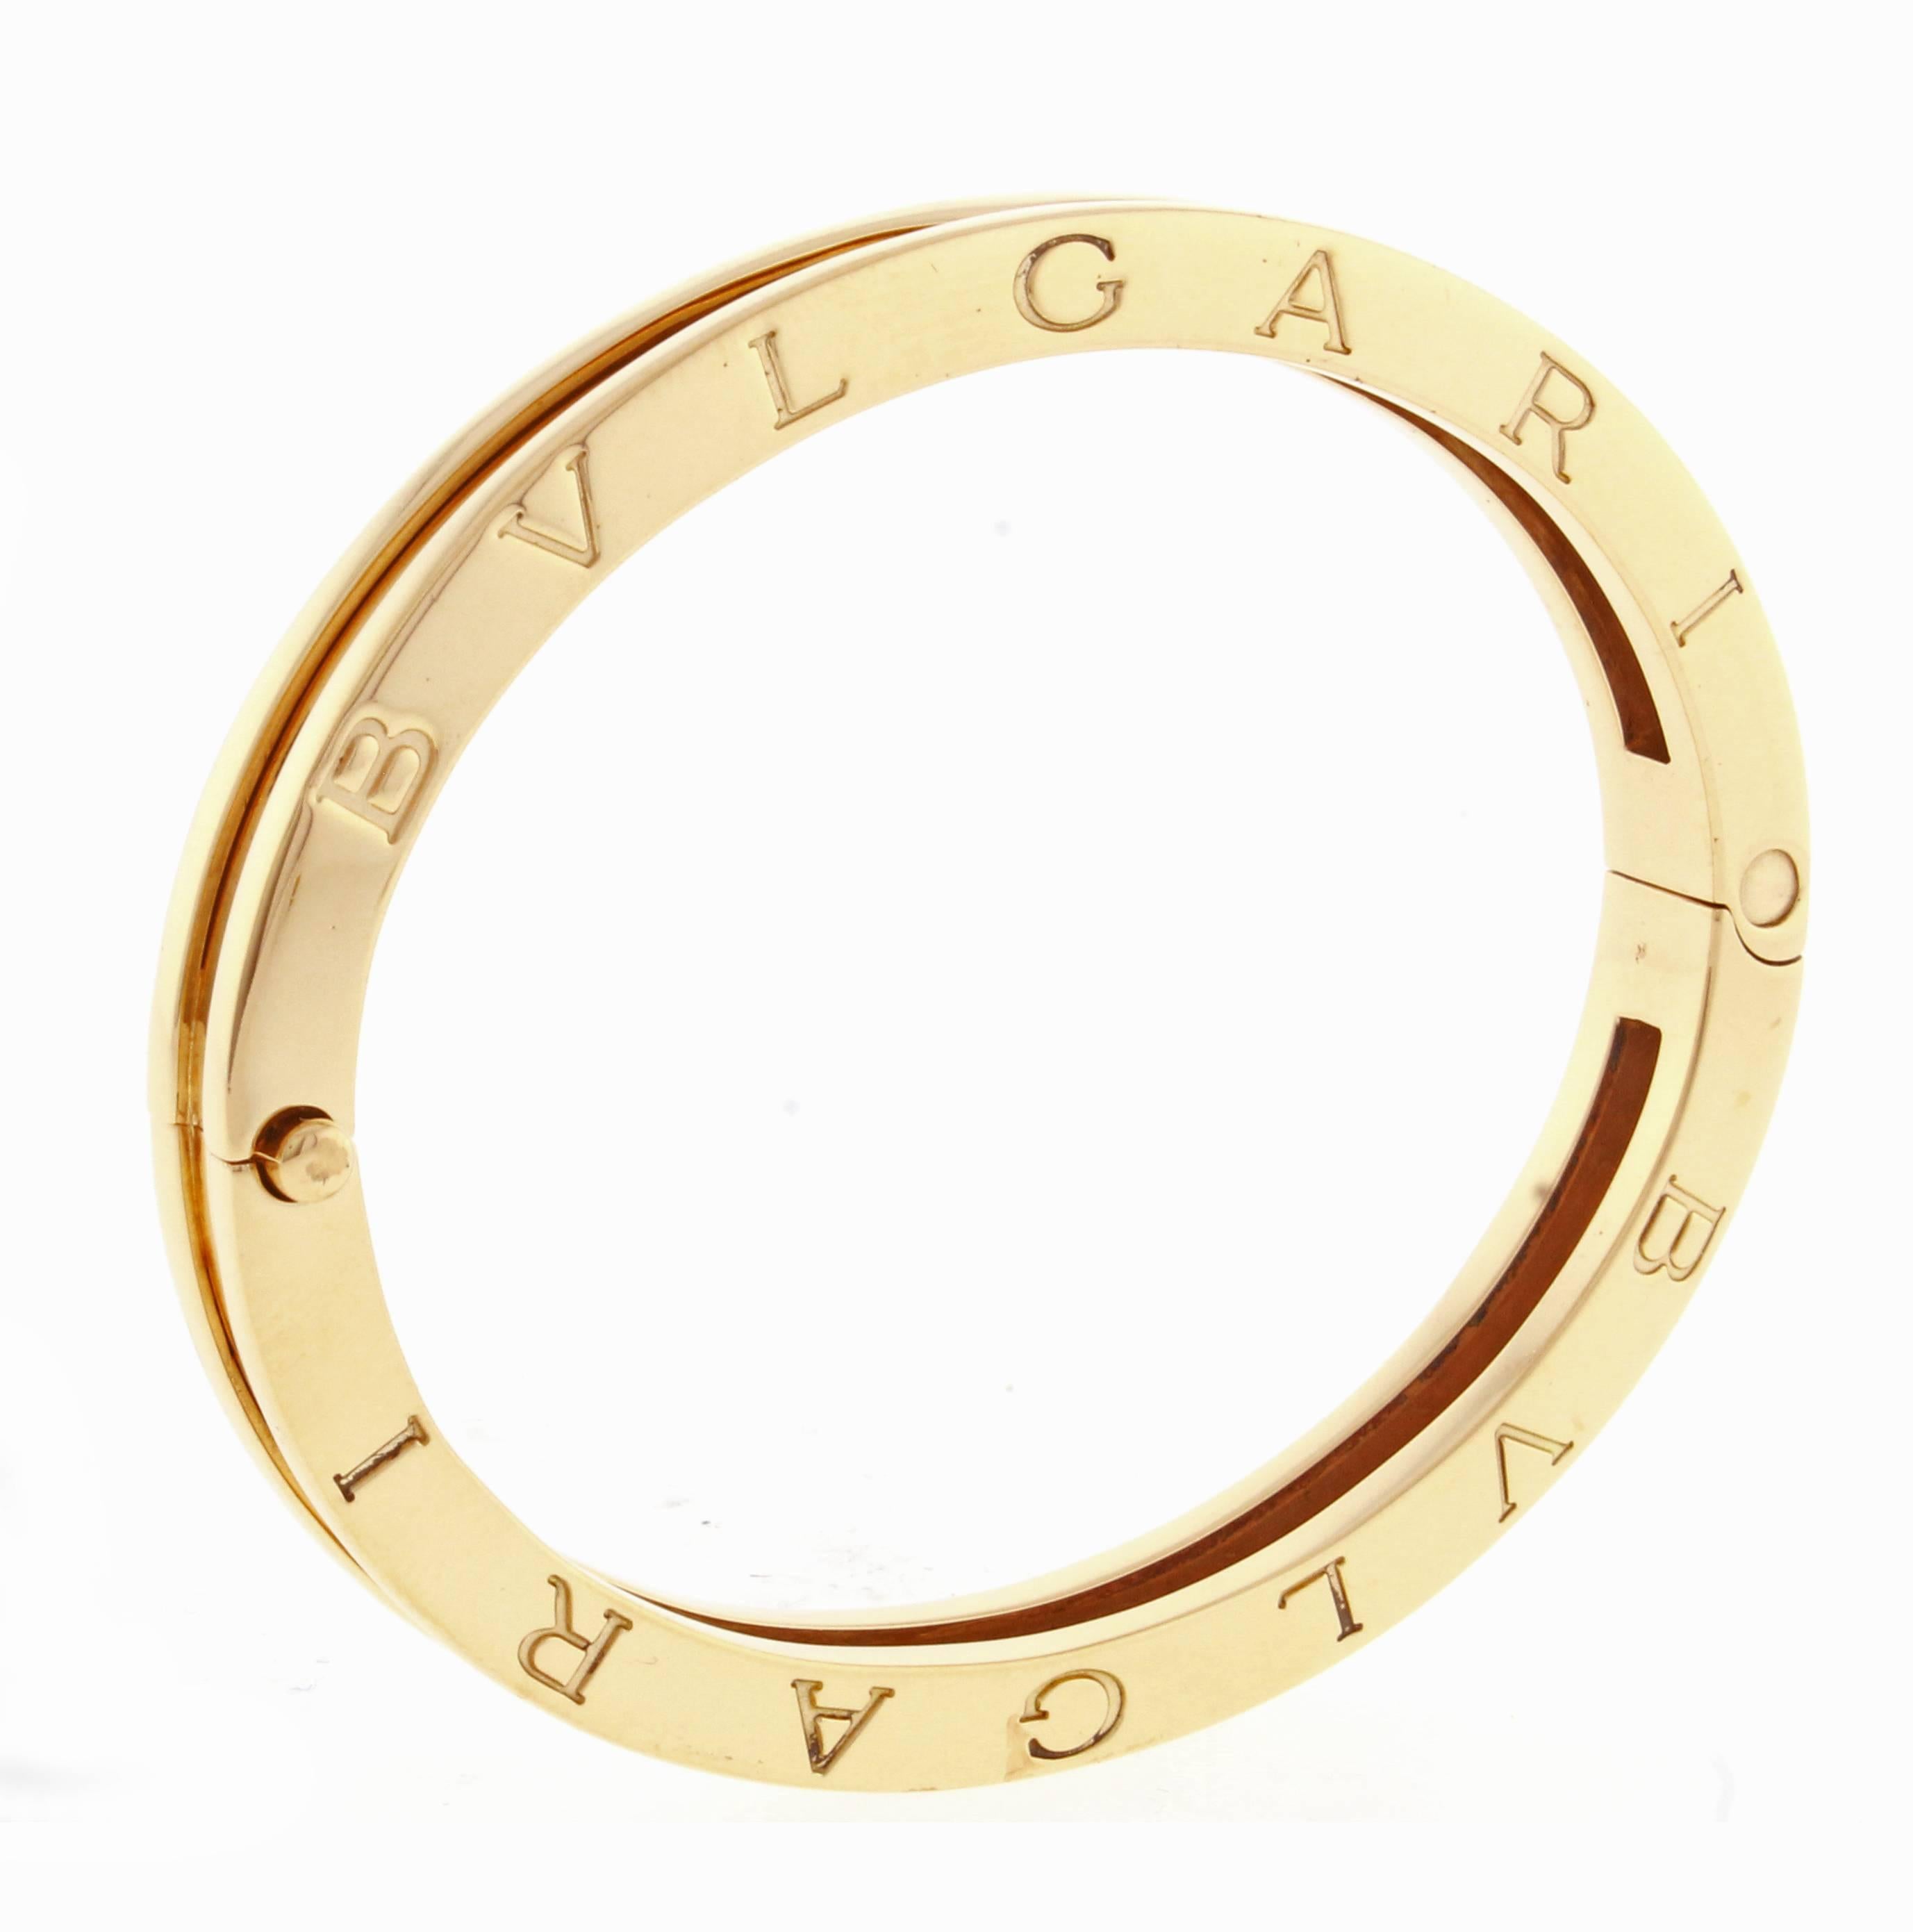 From Bulgari,  the Bvlgari B.Zero1 18 karat yellow gold bangle bracelet. This is the original, highly sought after, full weight design. 1/4 inch wide, fits up to a 6 1/2 inch wrist.  57.3 grams 
